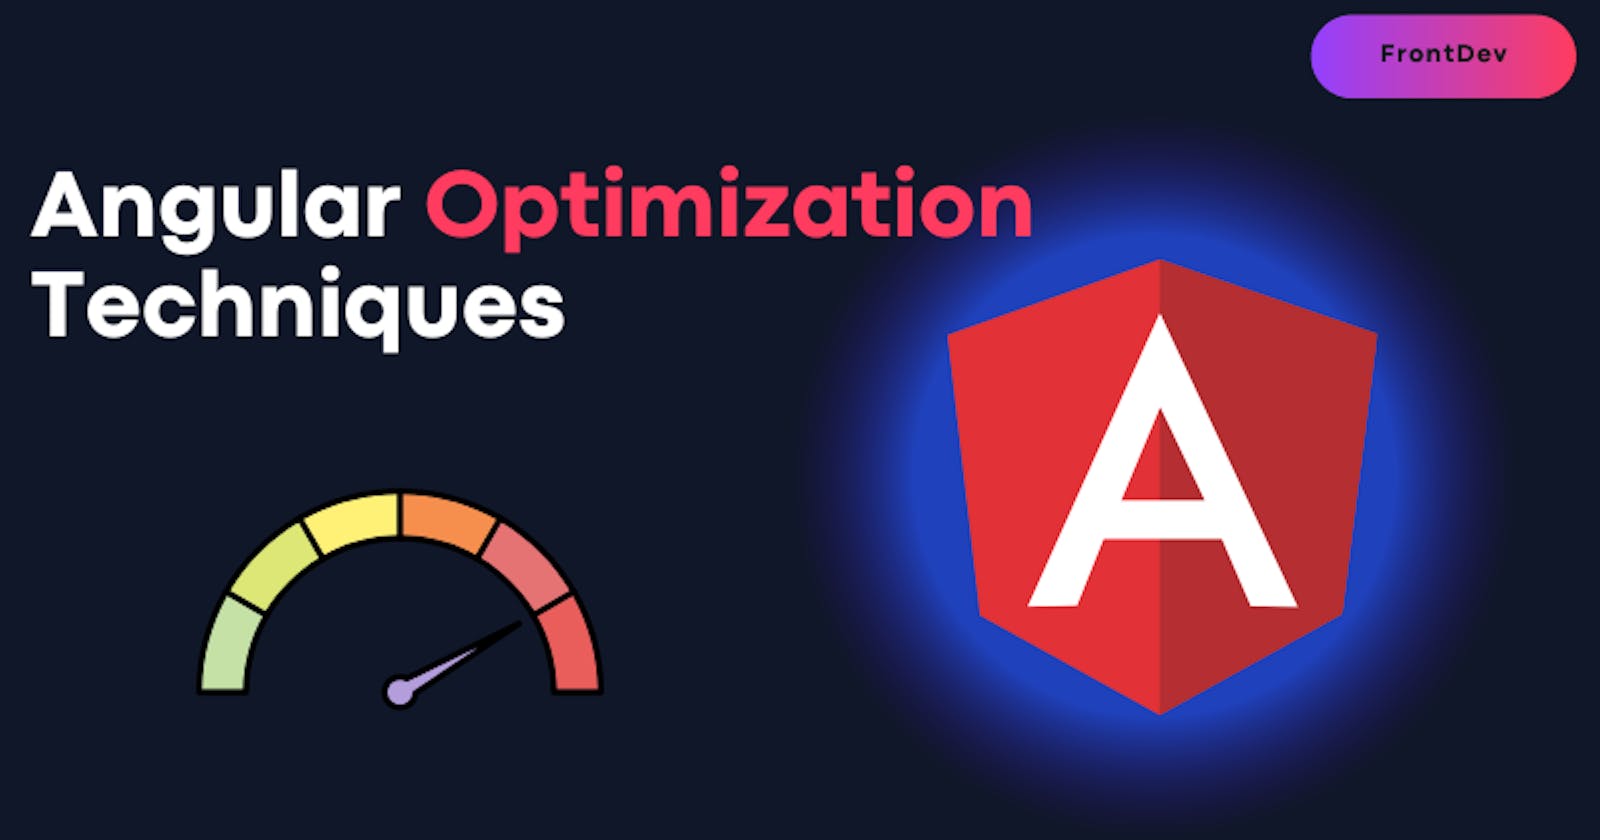 4 Best Practices and Techniques to Optimize Your Angular Application